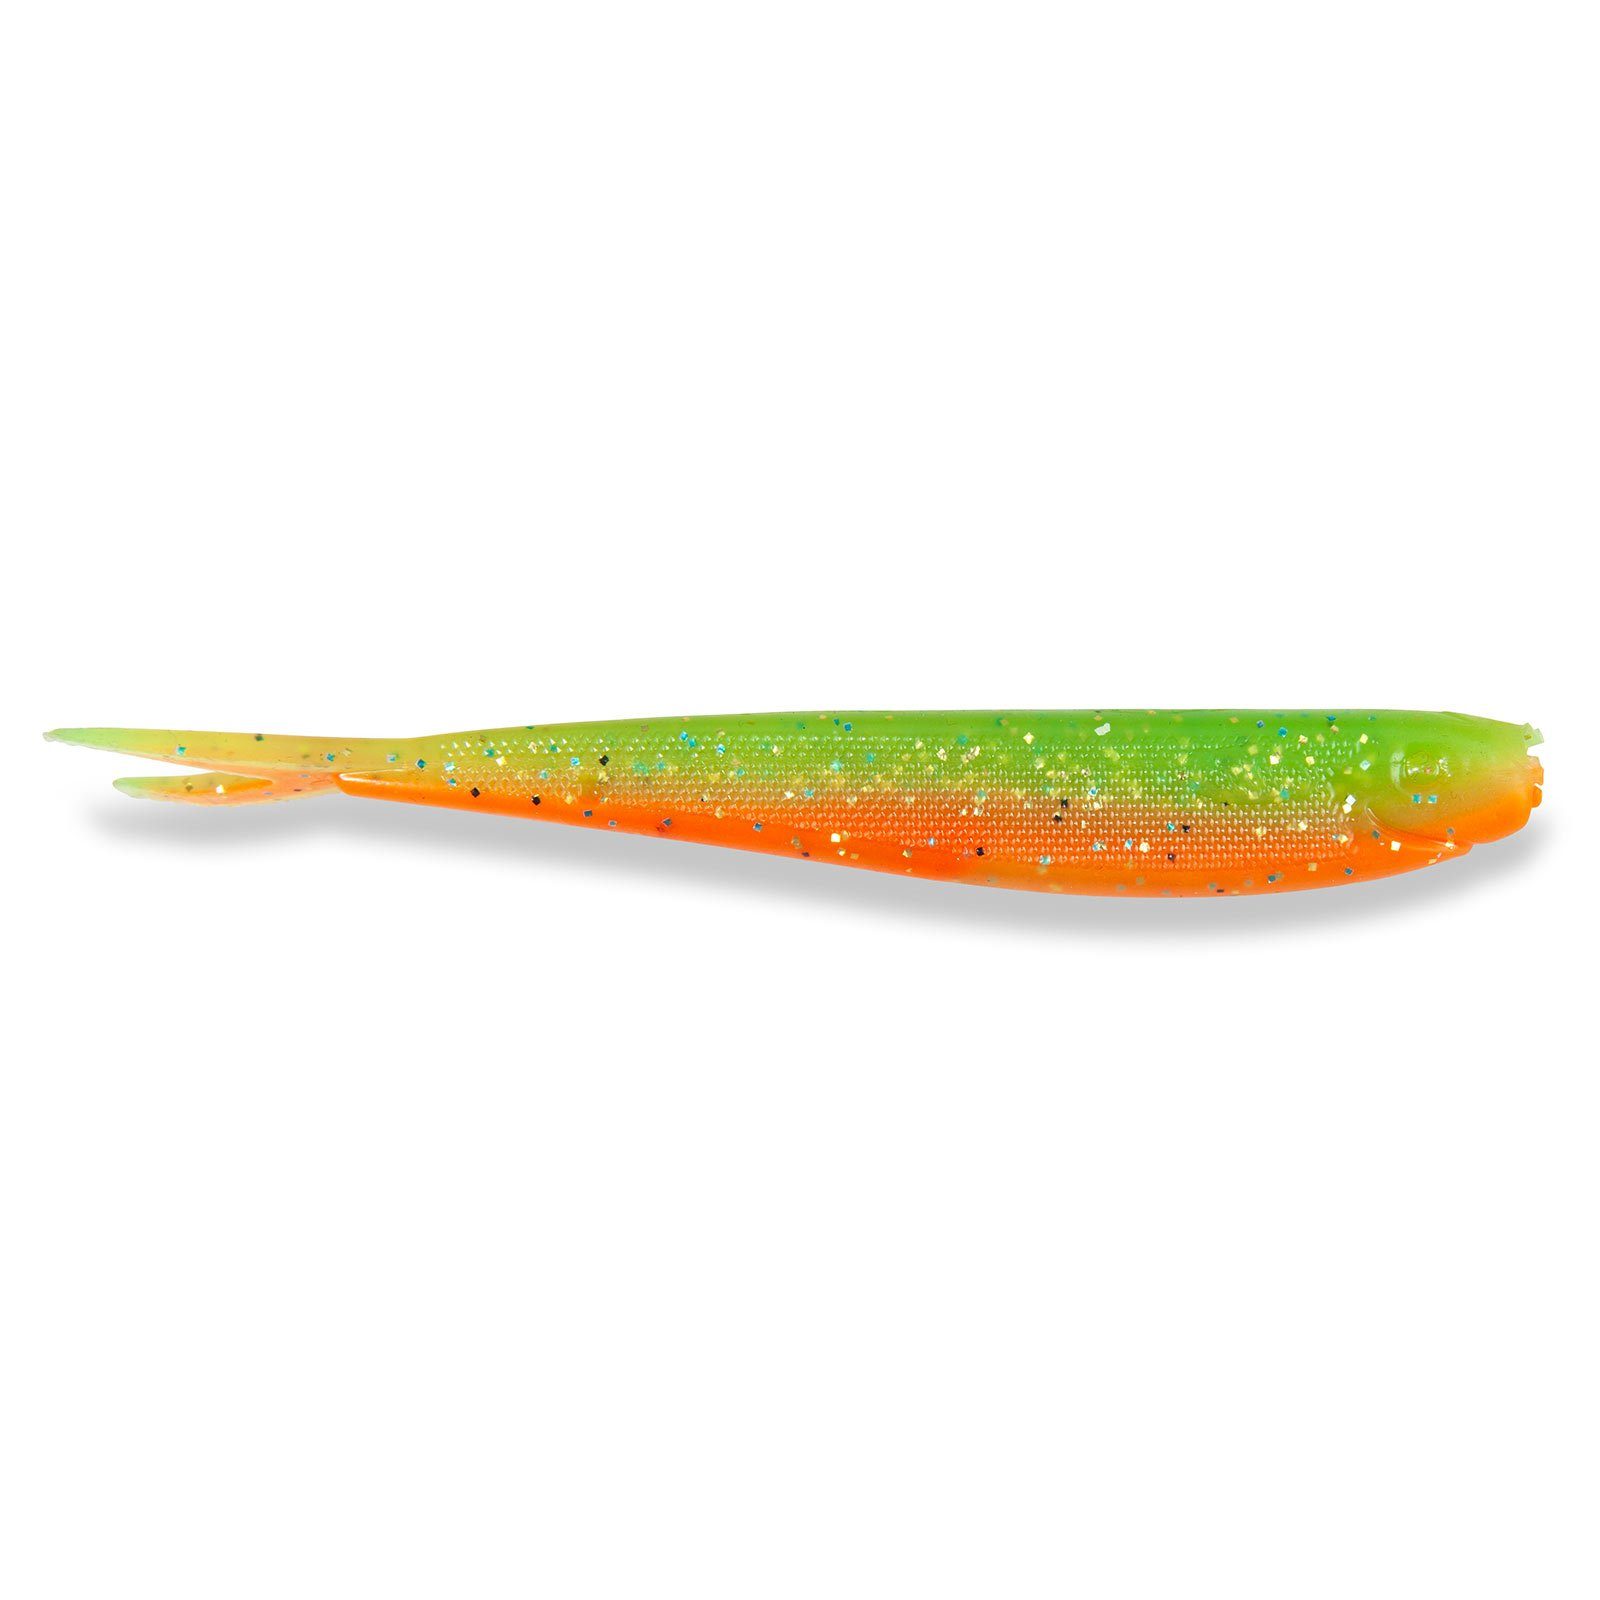 Moby Softbaits Kunstköder, Sänger Iron Claw Moby V-Tail Non Toxic 2.0 19cm Turtle Green UV 1 Stk. Gummifische